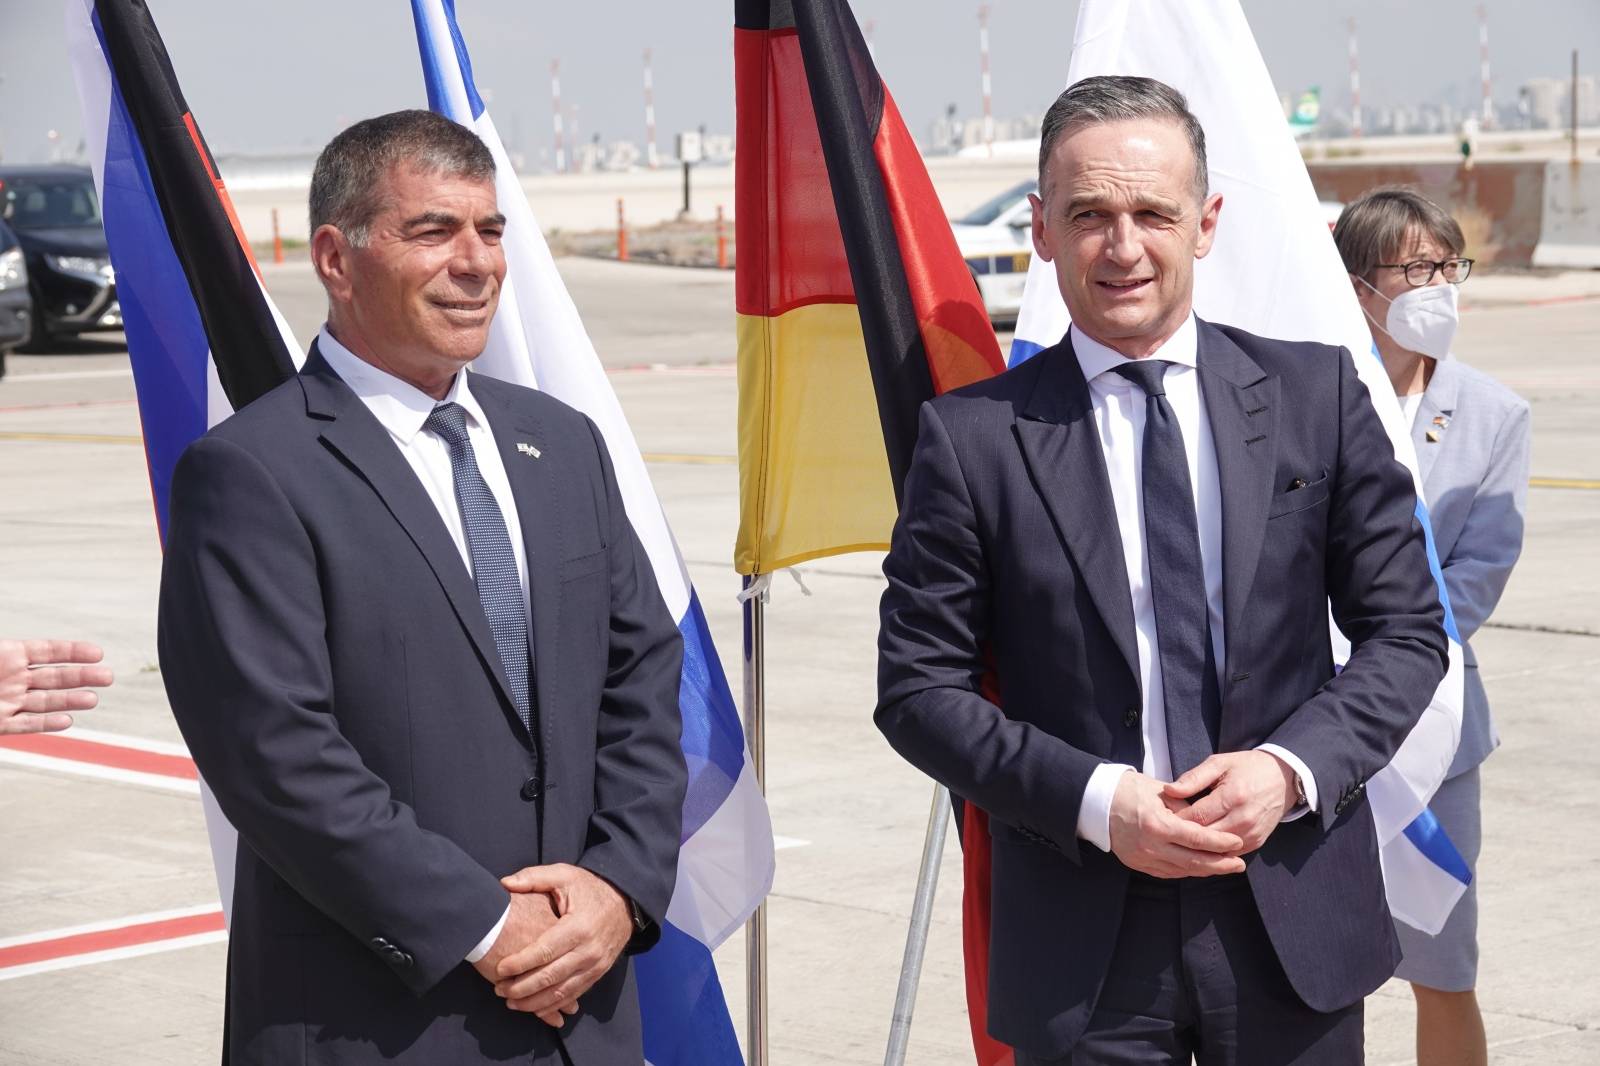 Federal Foreign Minister Heiko Maas visits Israel